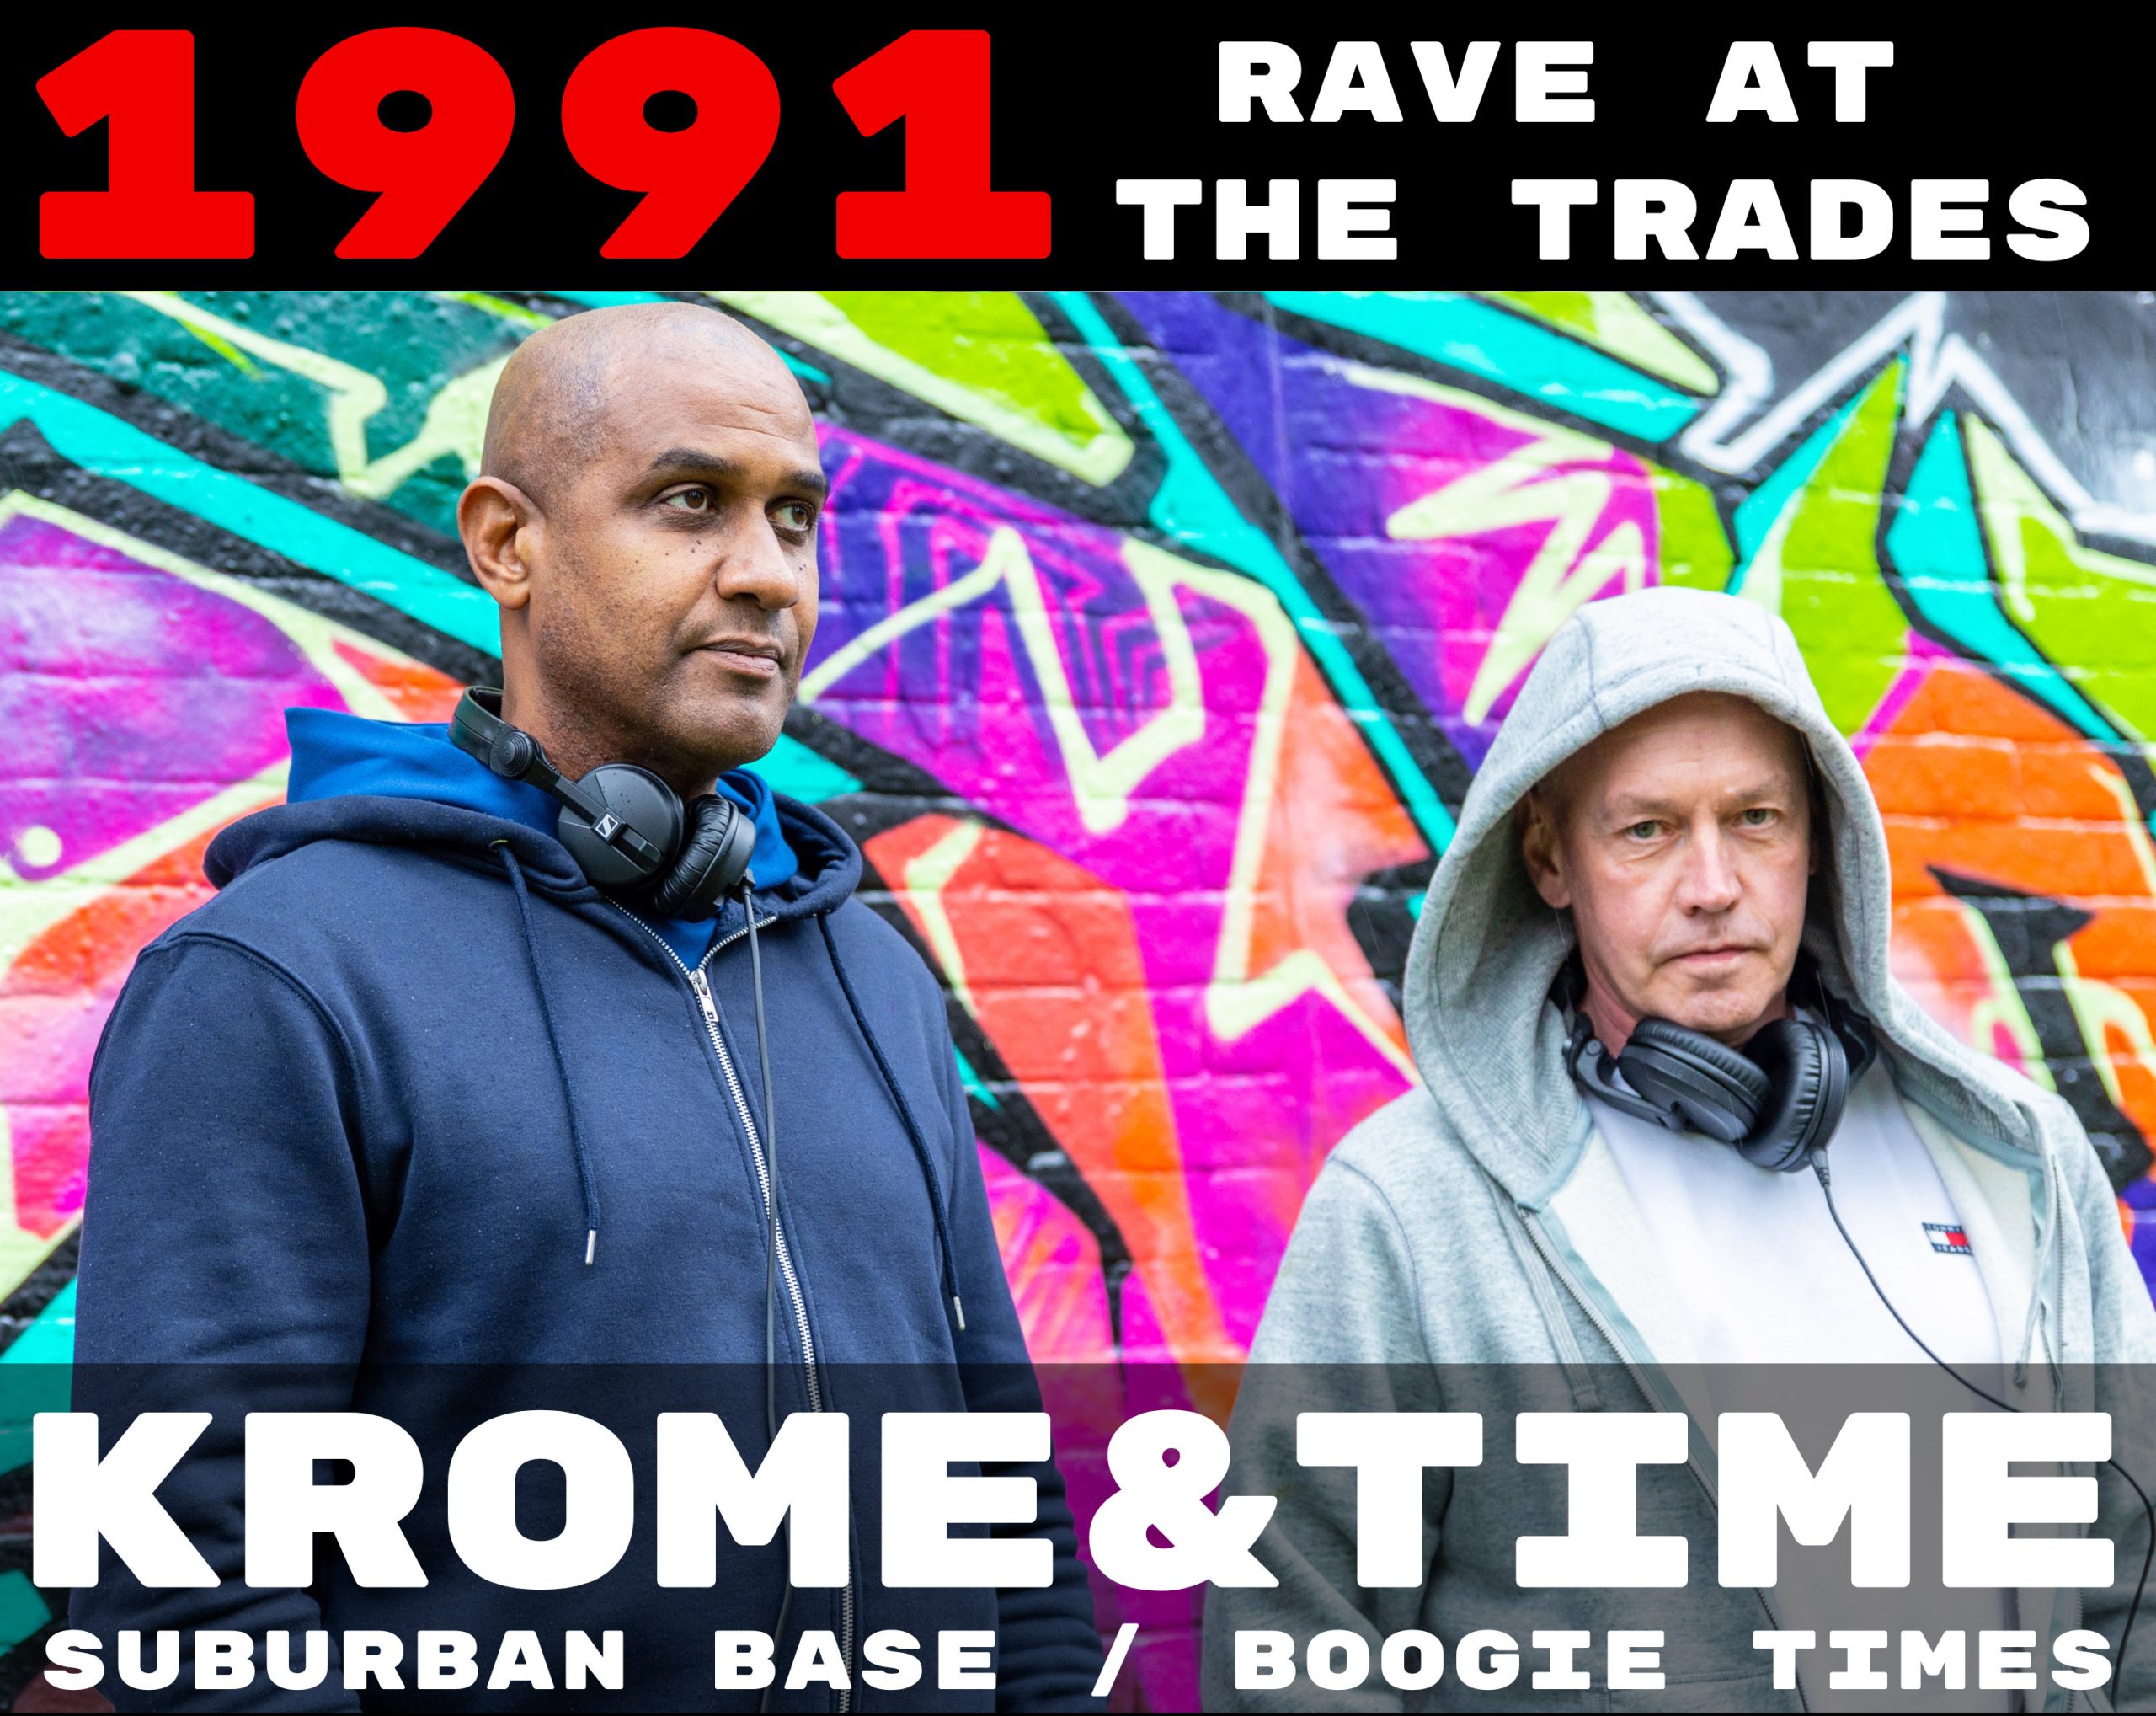 1991 Rave at the Trades: Krome & Time